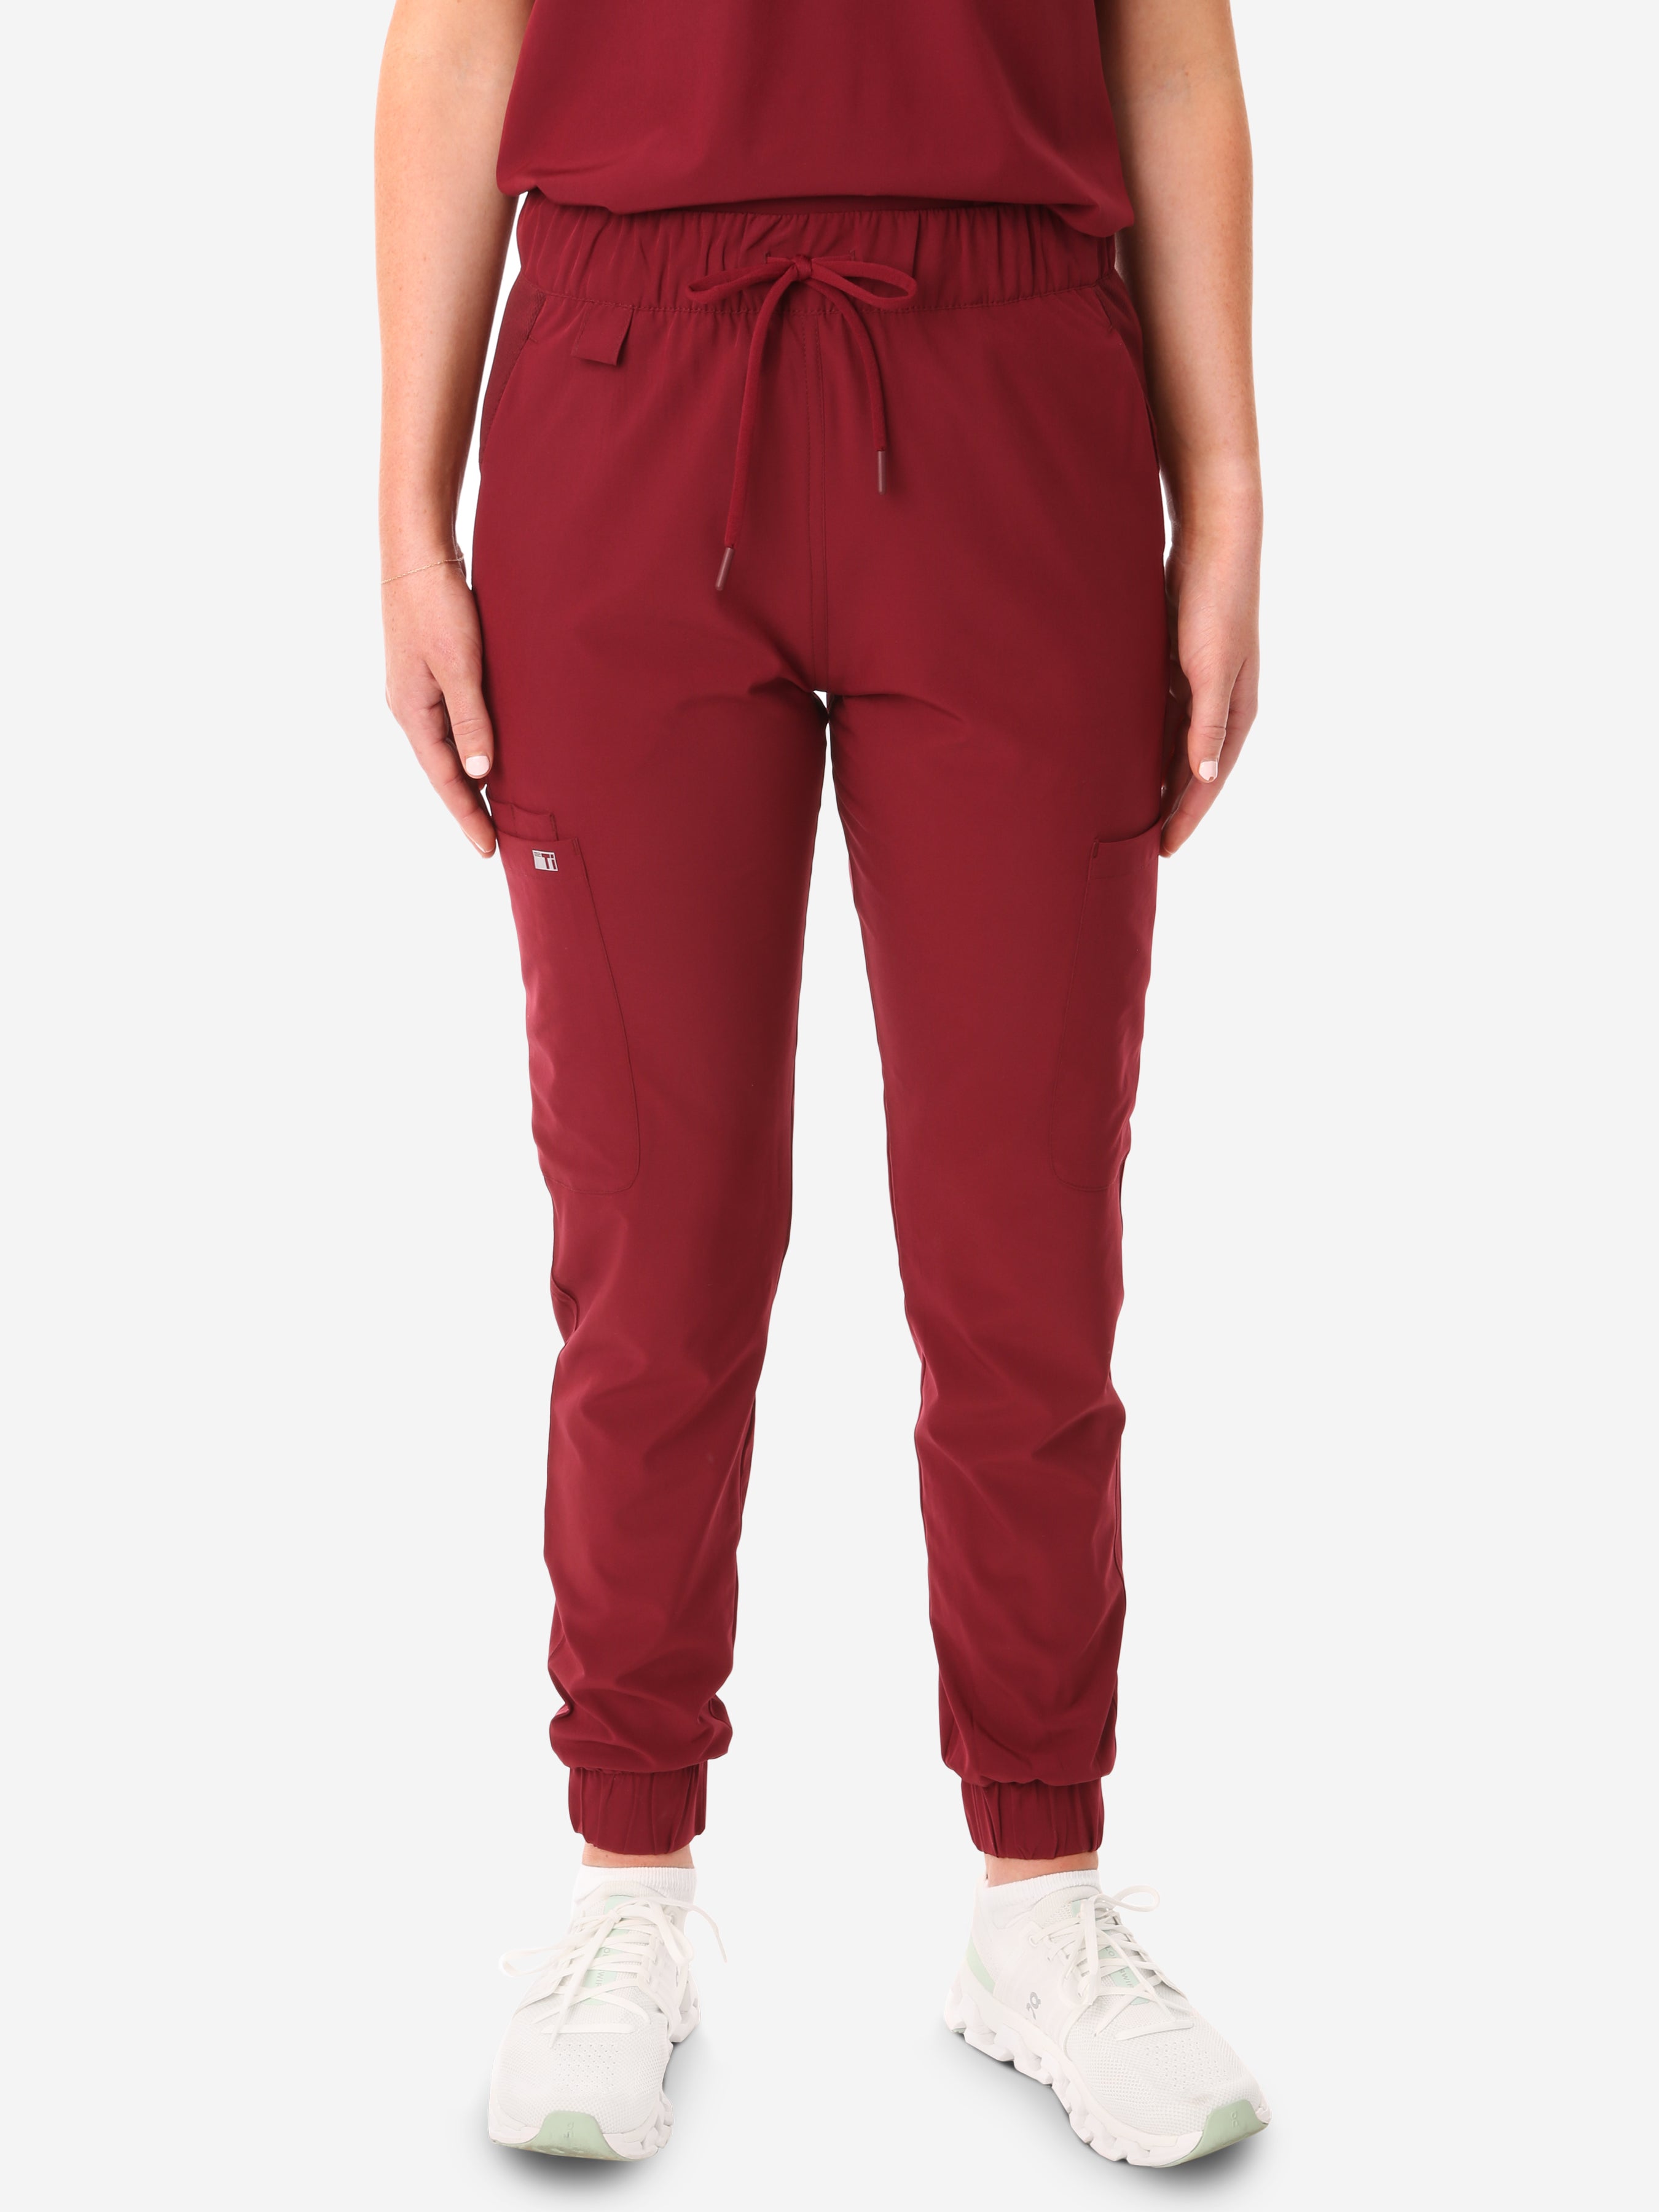 TiScrubs Bold Burgundy Women's Stretch Perfect Jogger Pants Front View Pants Only